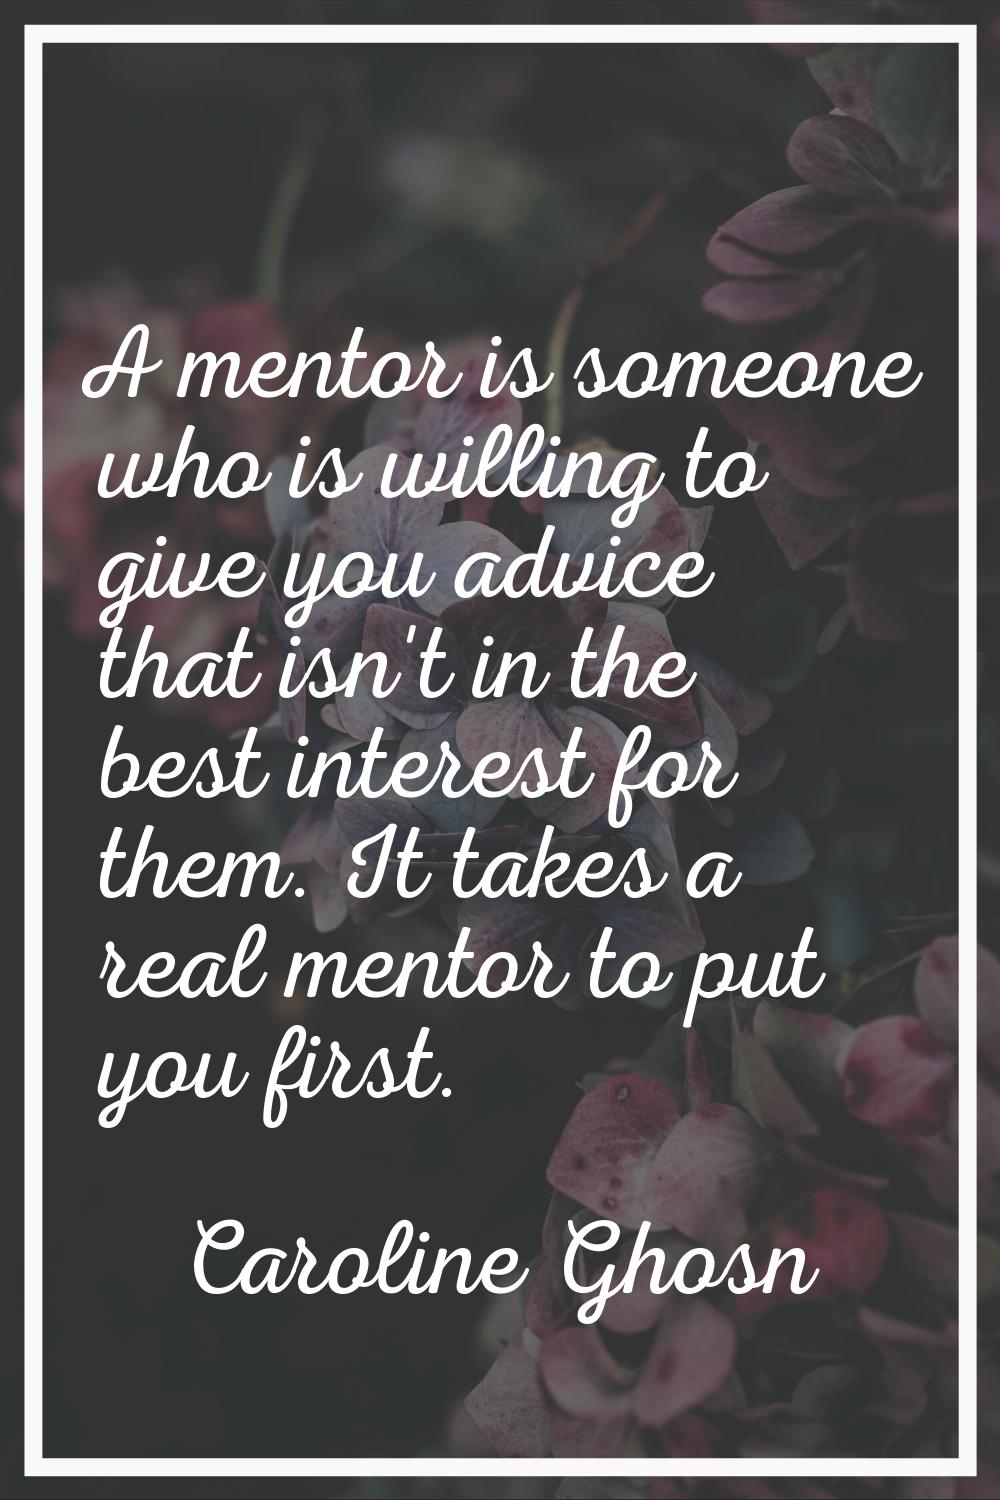 A mentor is someone who is willing to give you advice that isn't in the best interest for them. It 